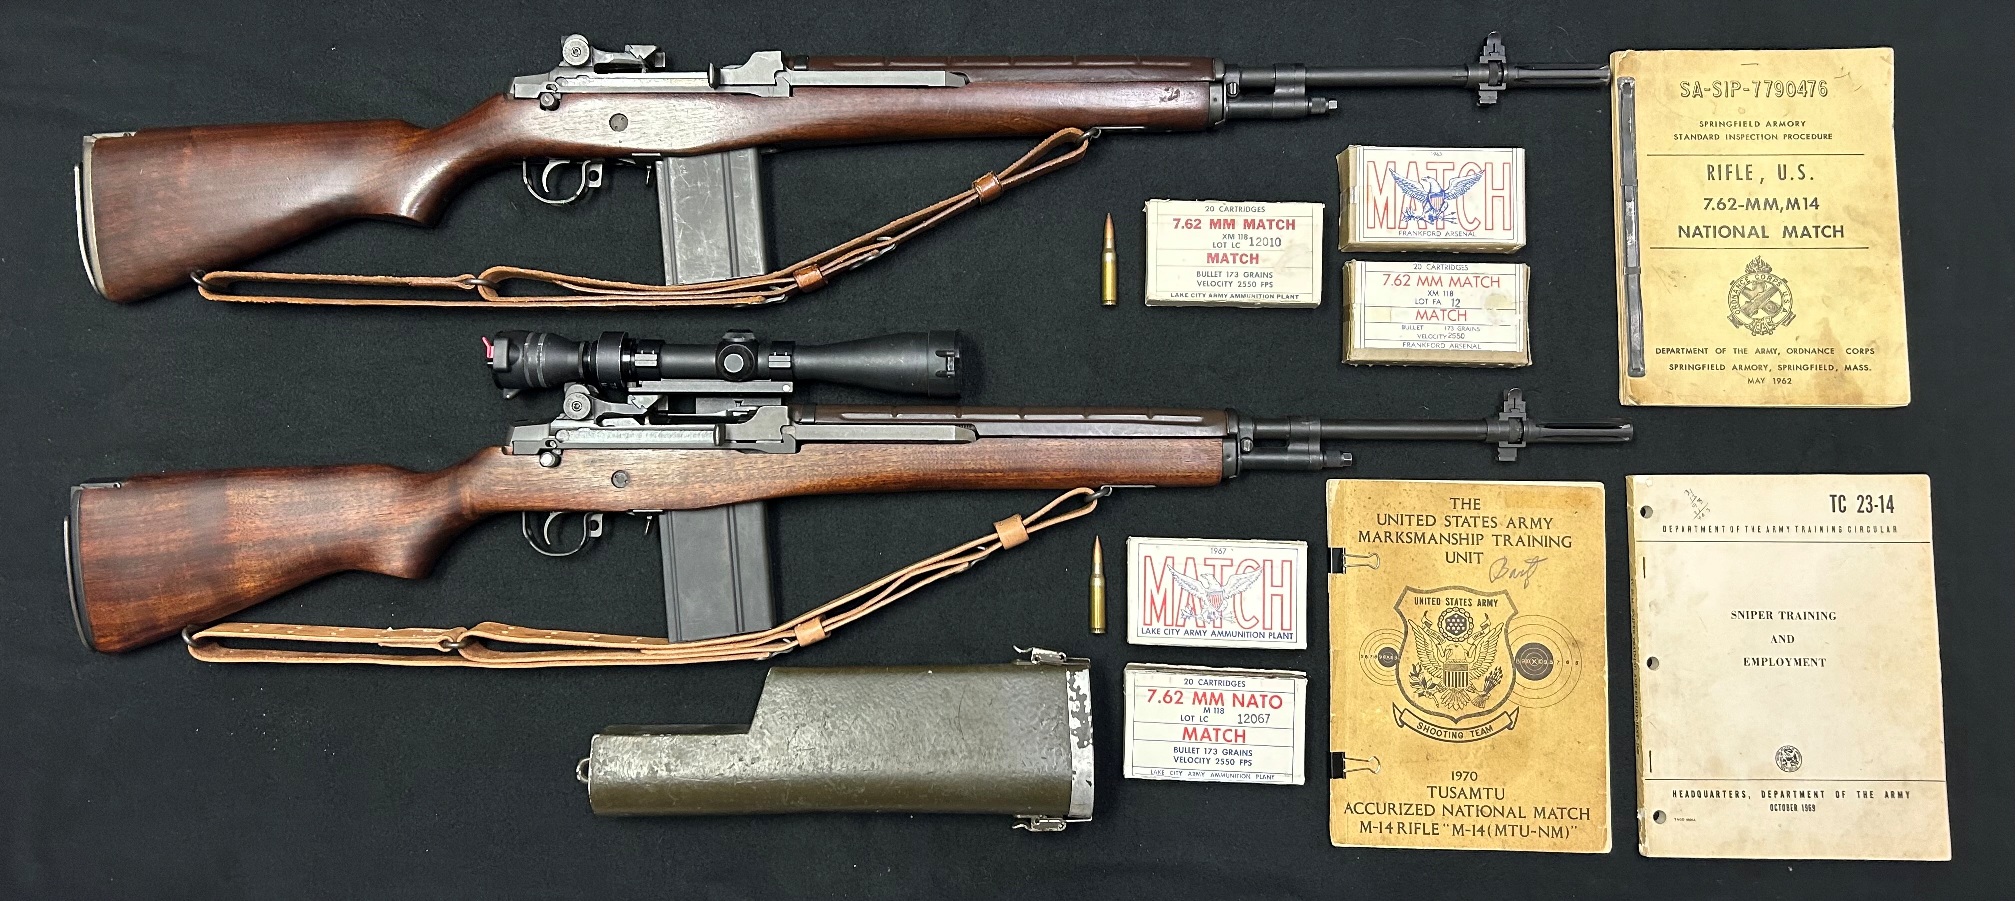 1962 NM and 1969 XM21 rifles compared1_v2.jpg